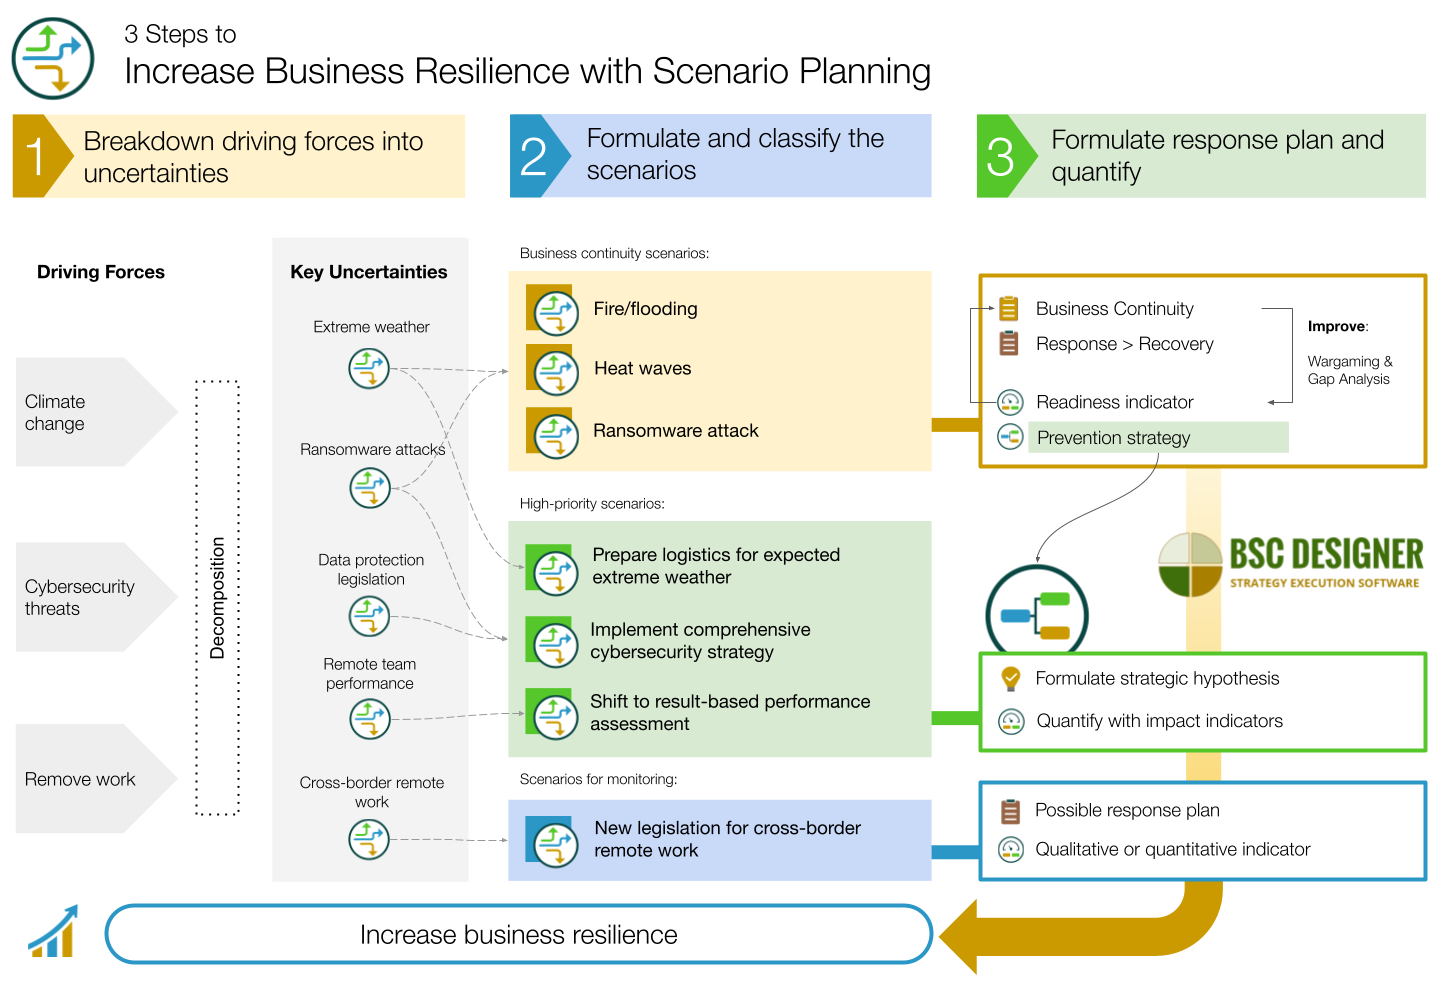 3 Steps to Increase Business Resilience with Scenario Planning